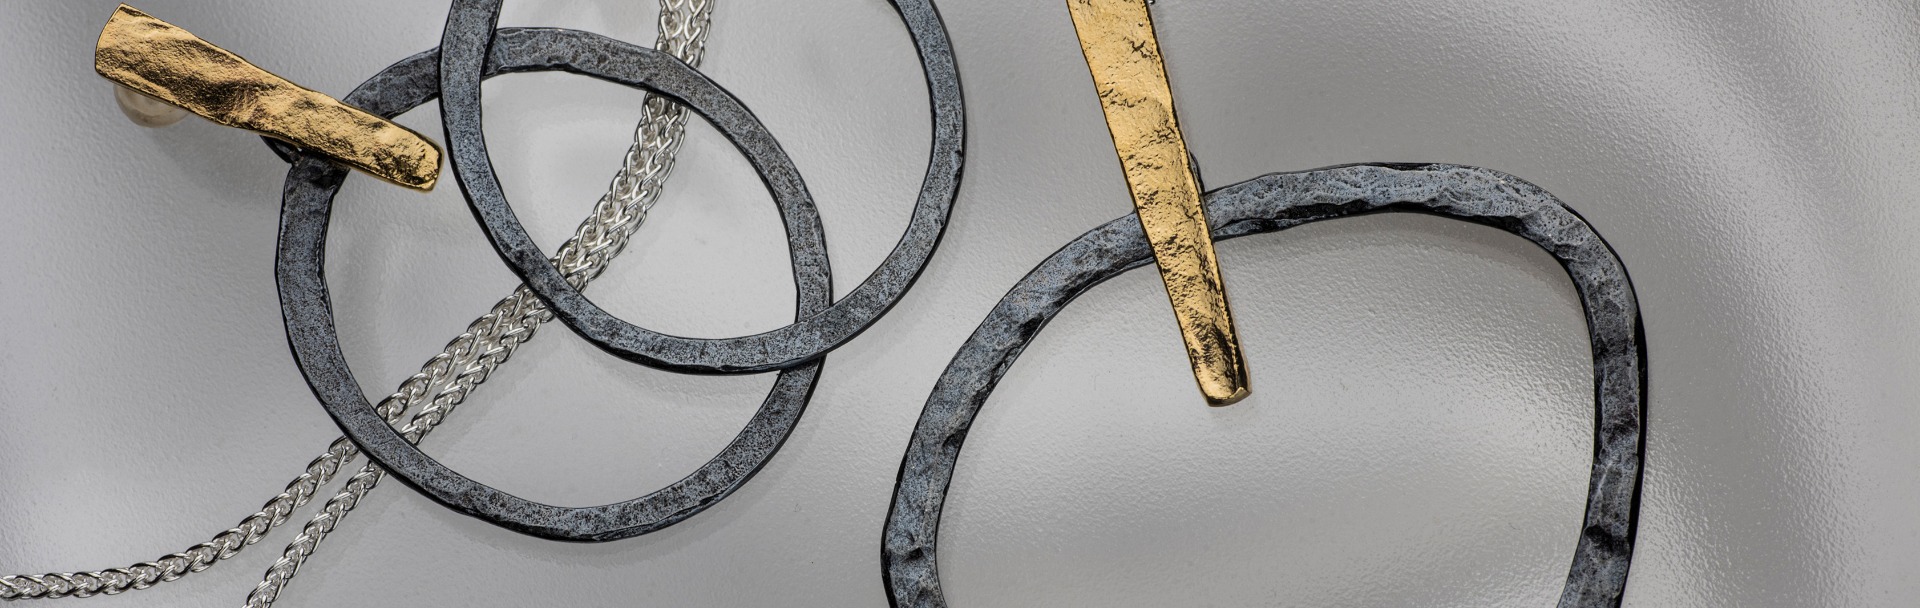 A silver jewelry collection enhanced with gilded, darkened and whitened silver finishes